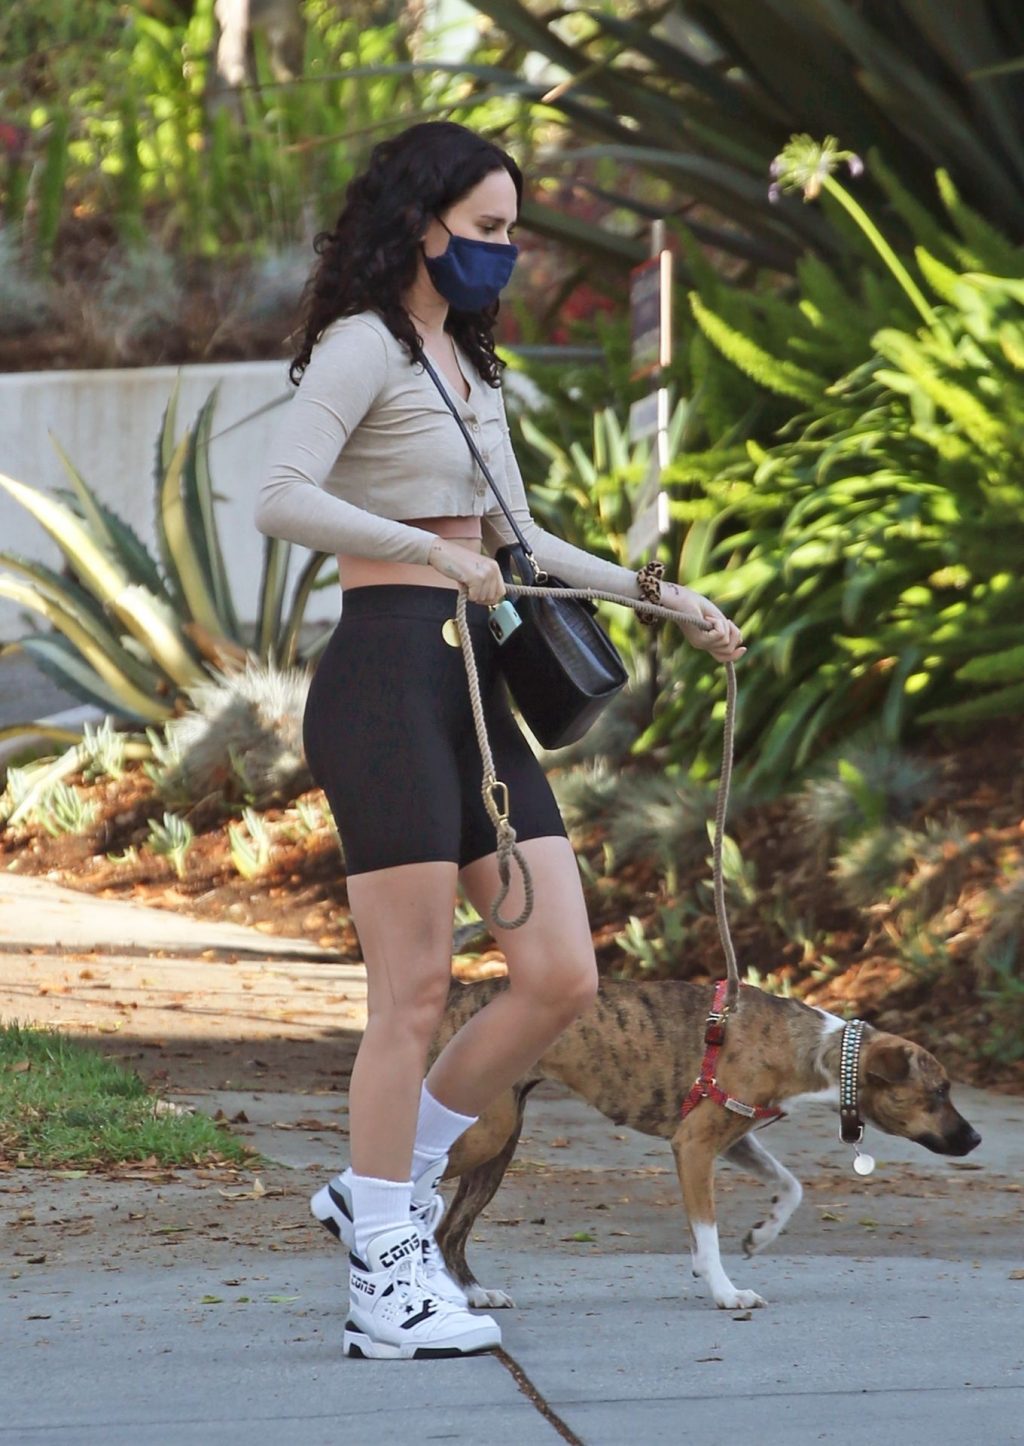 Rumer Willis Has a Busy Day of Hair Extensions and Dog Training in L.A (51 Photos)